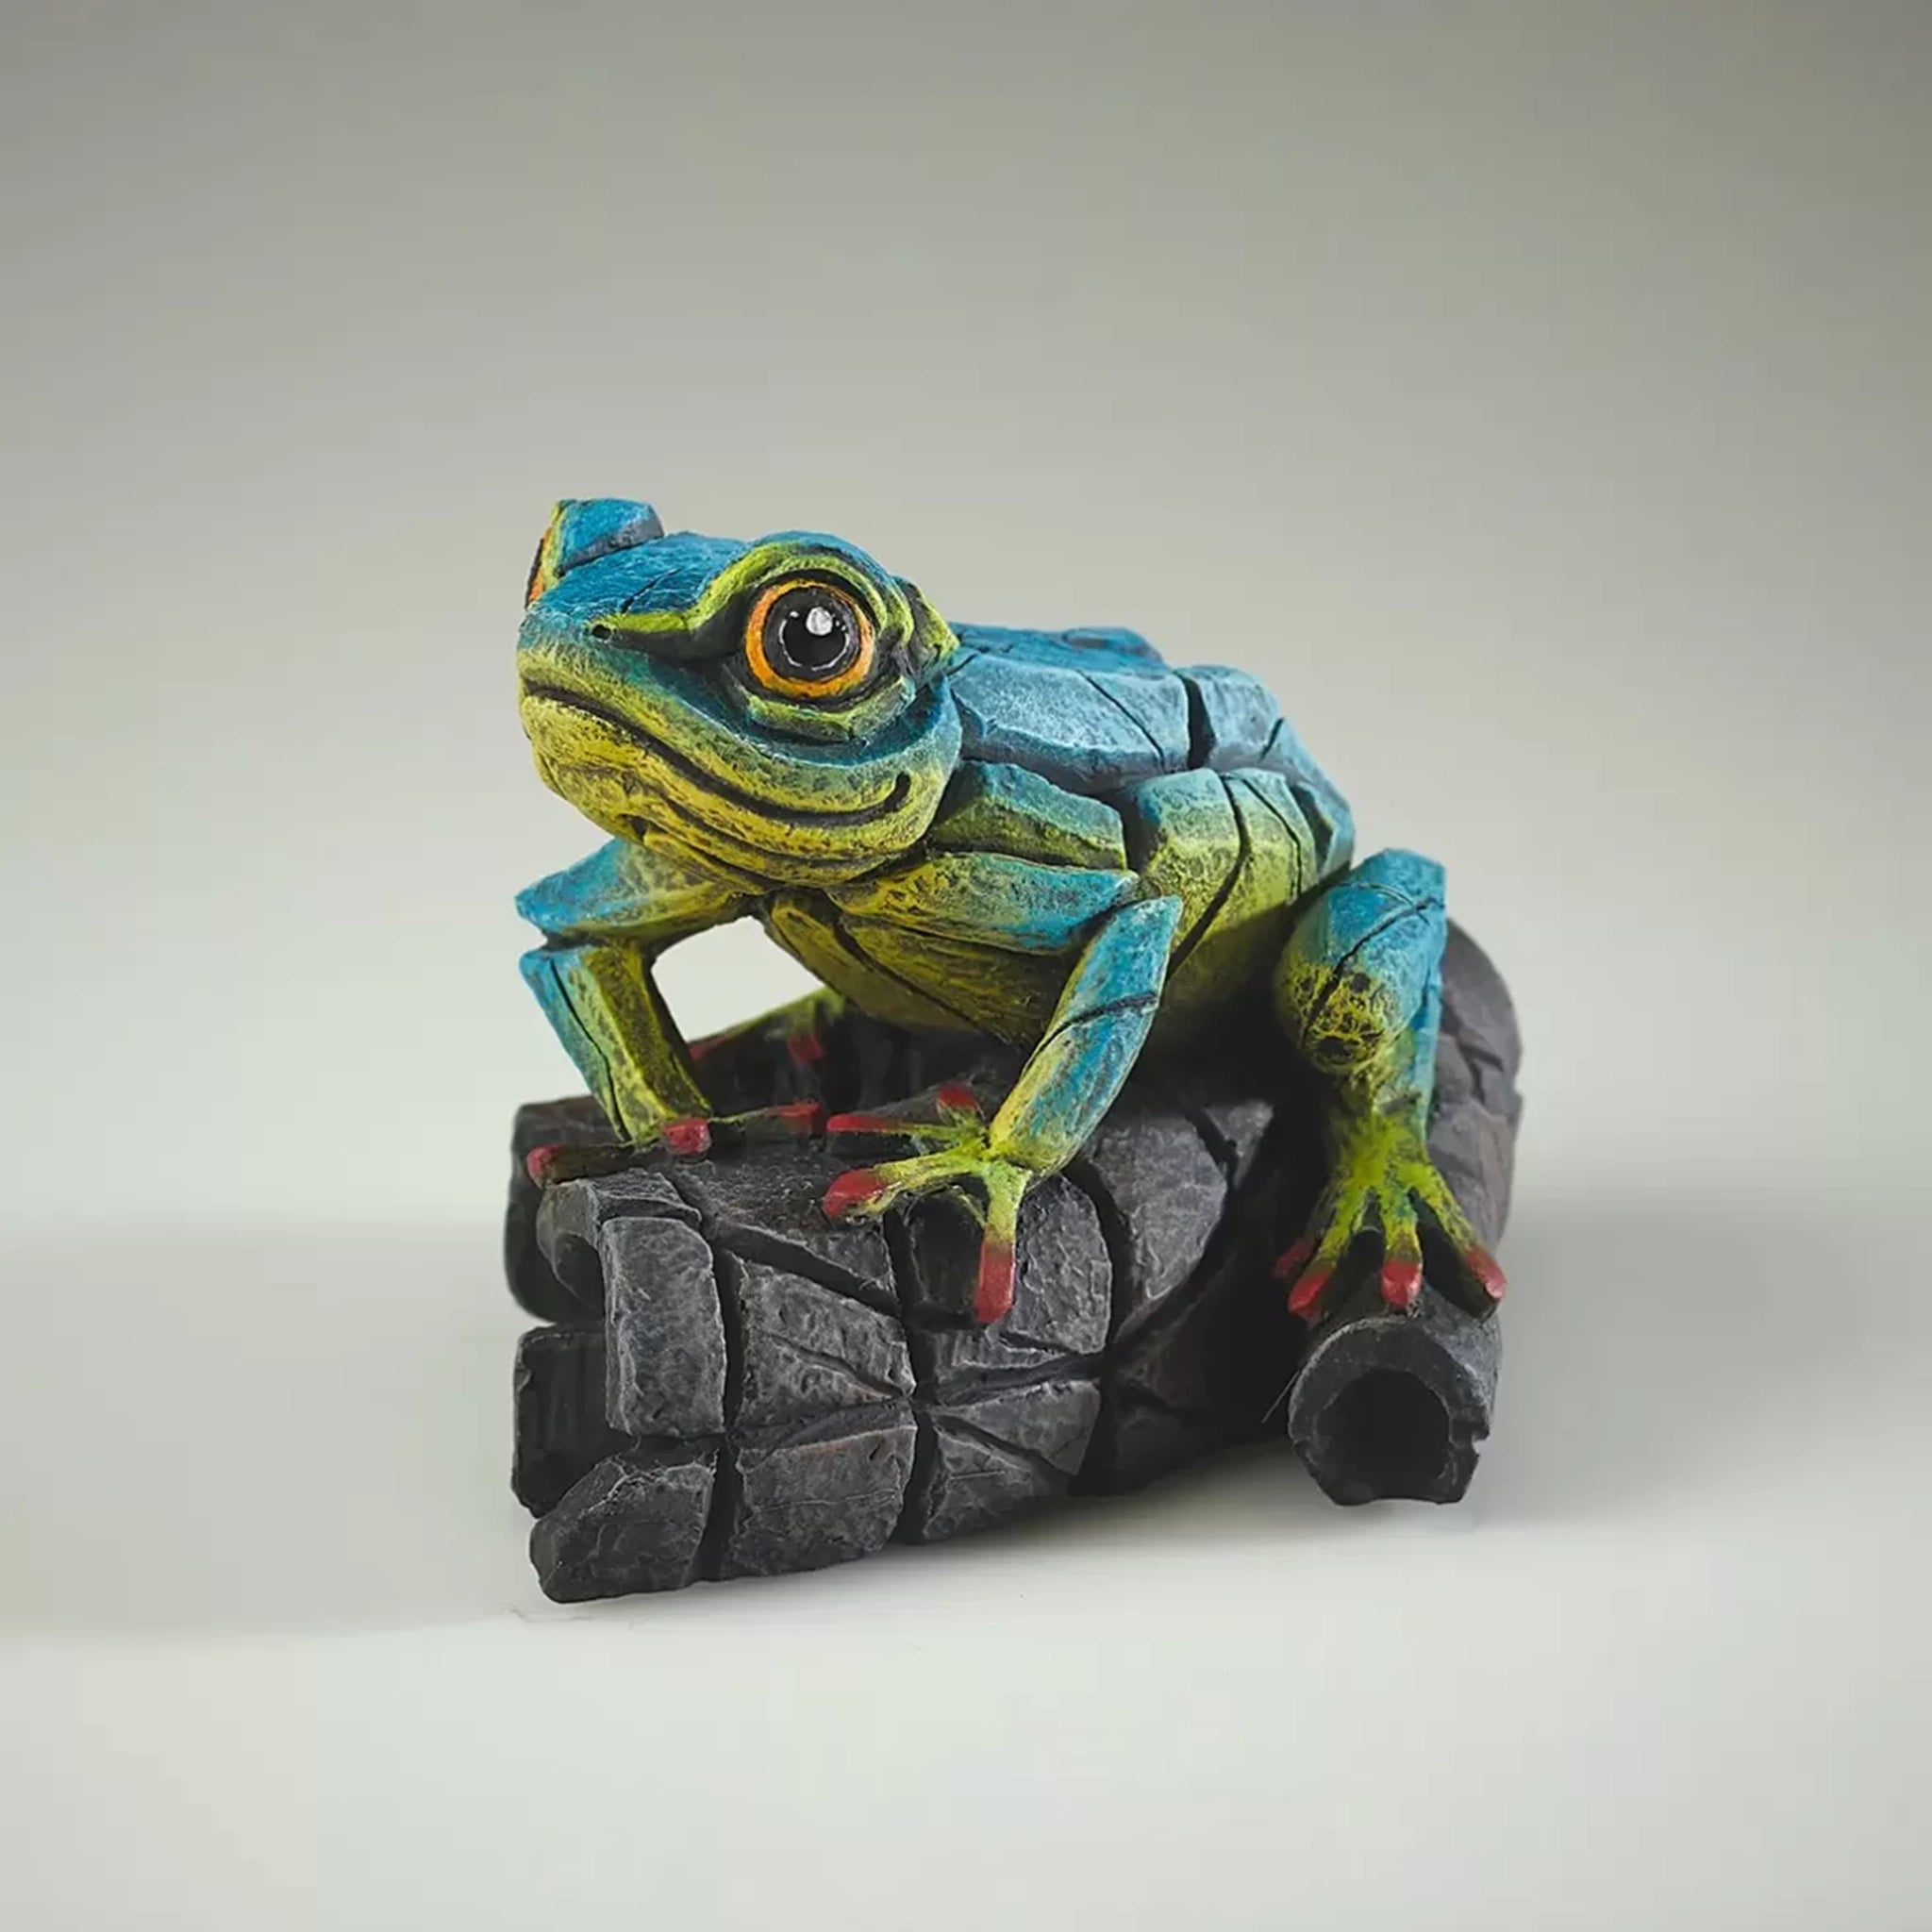 A textured and painted blue and yellow tree frog on log sculpture from side